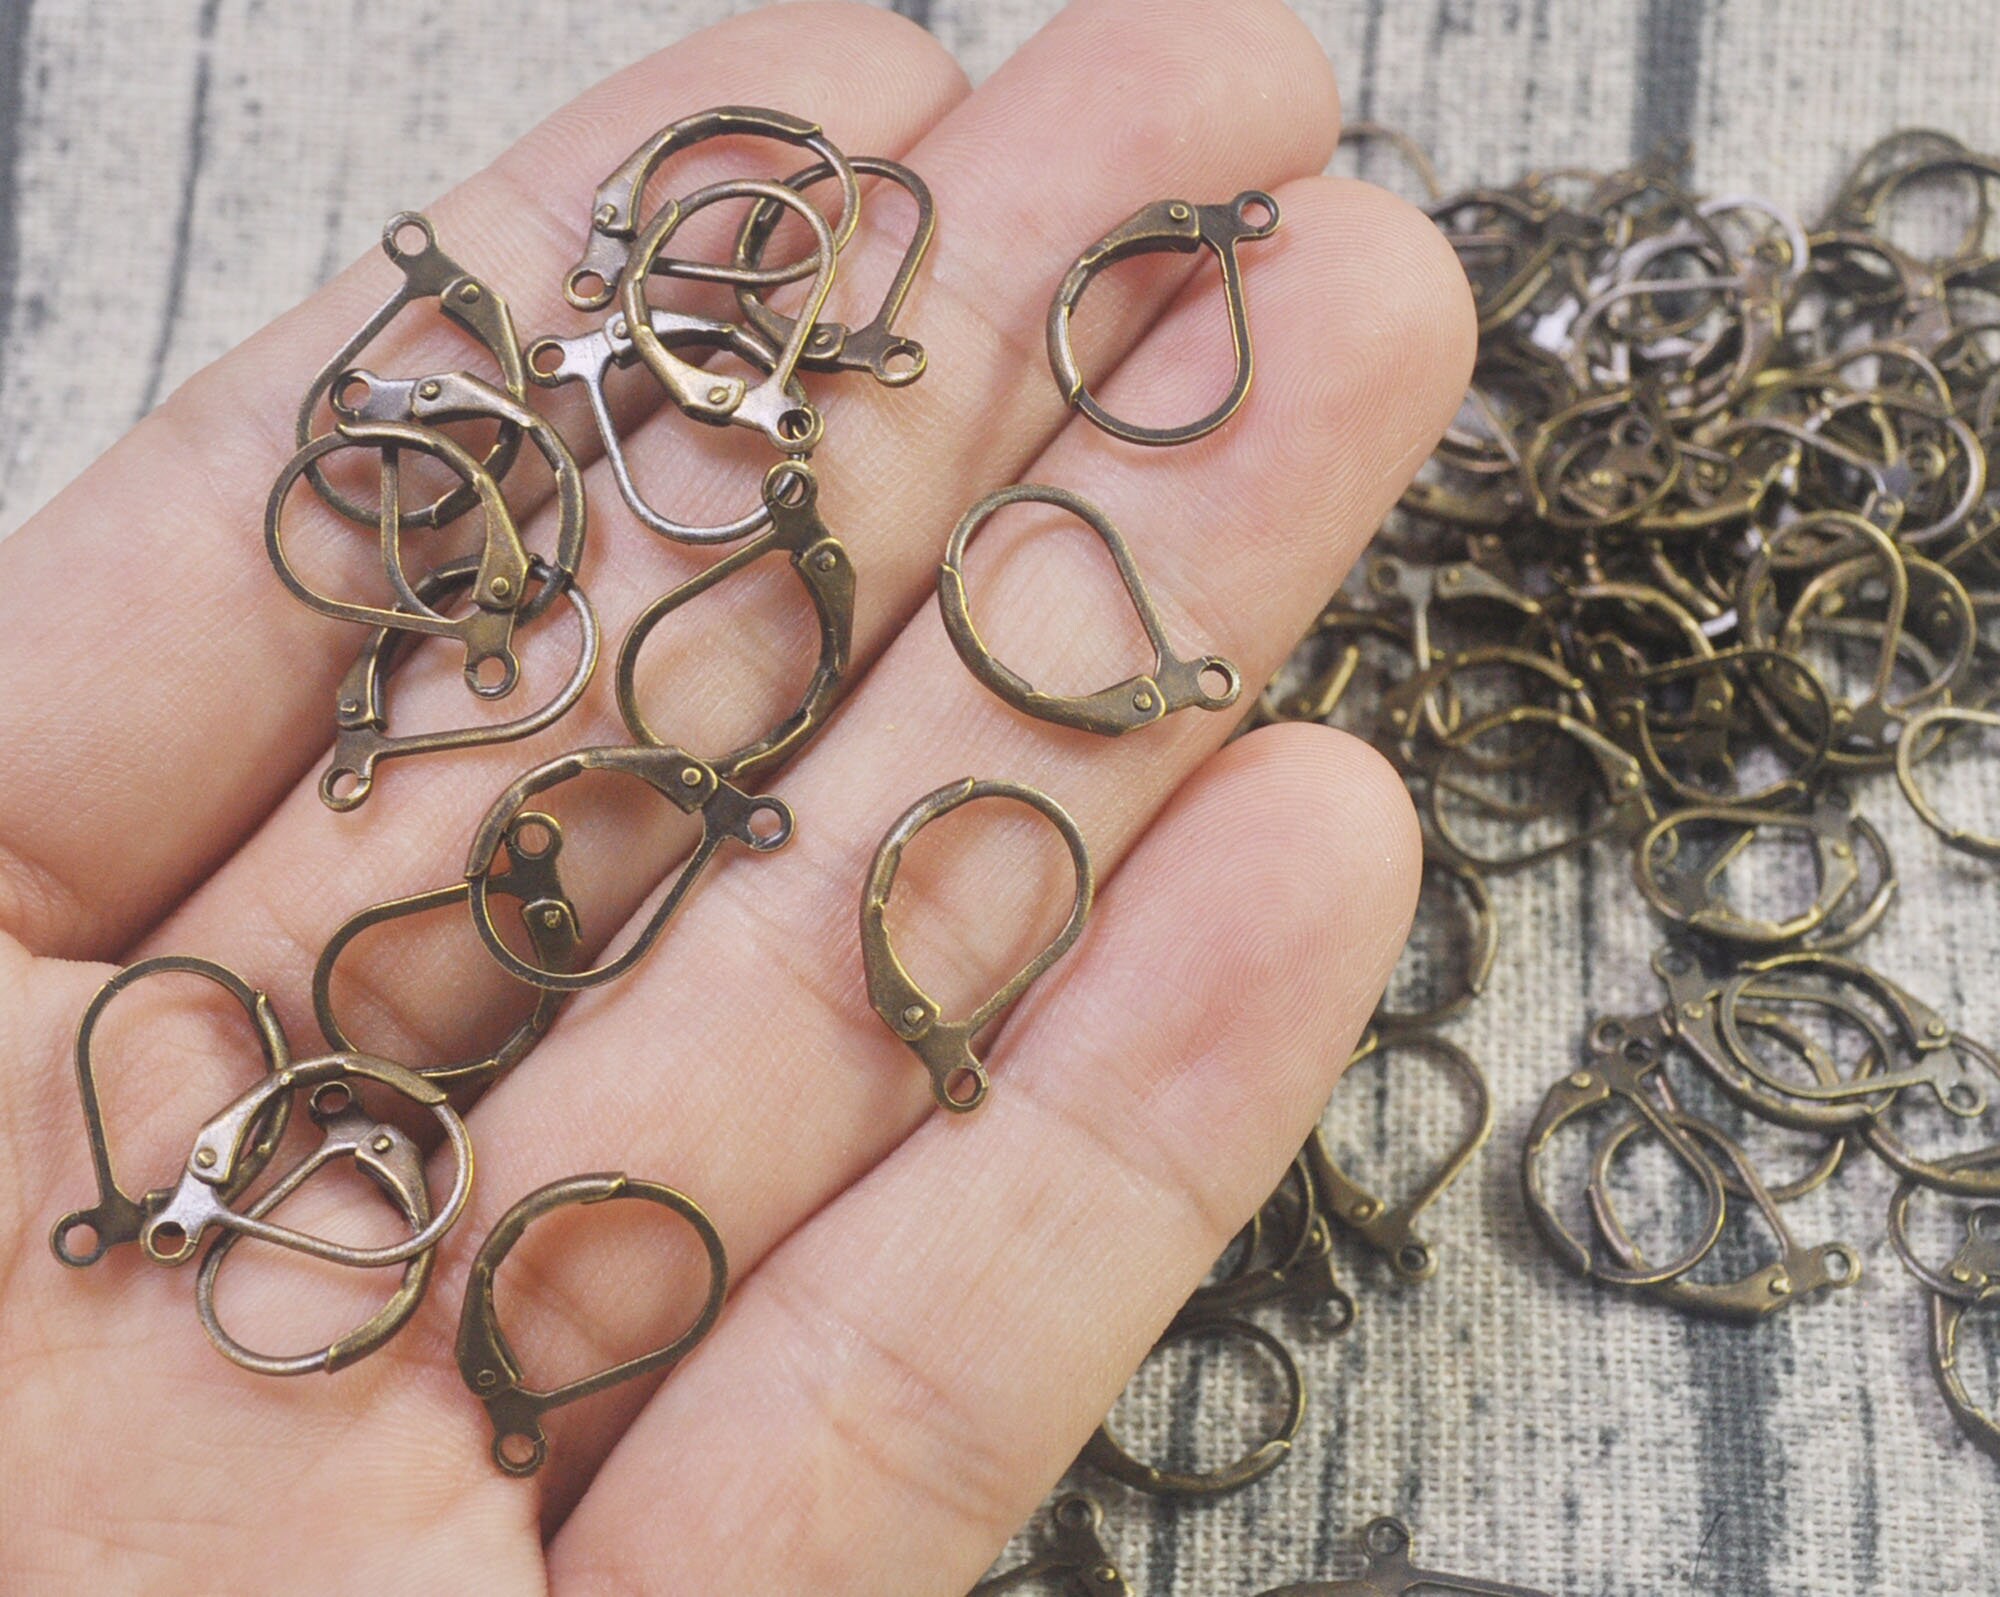 100pcs Wholesale Retro French Leverback Earwire with Open Loop DIY Finding Craft